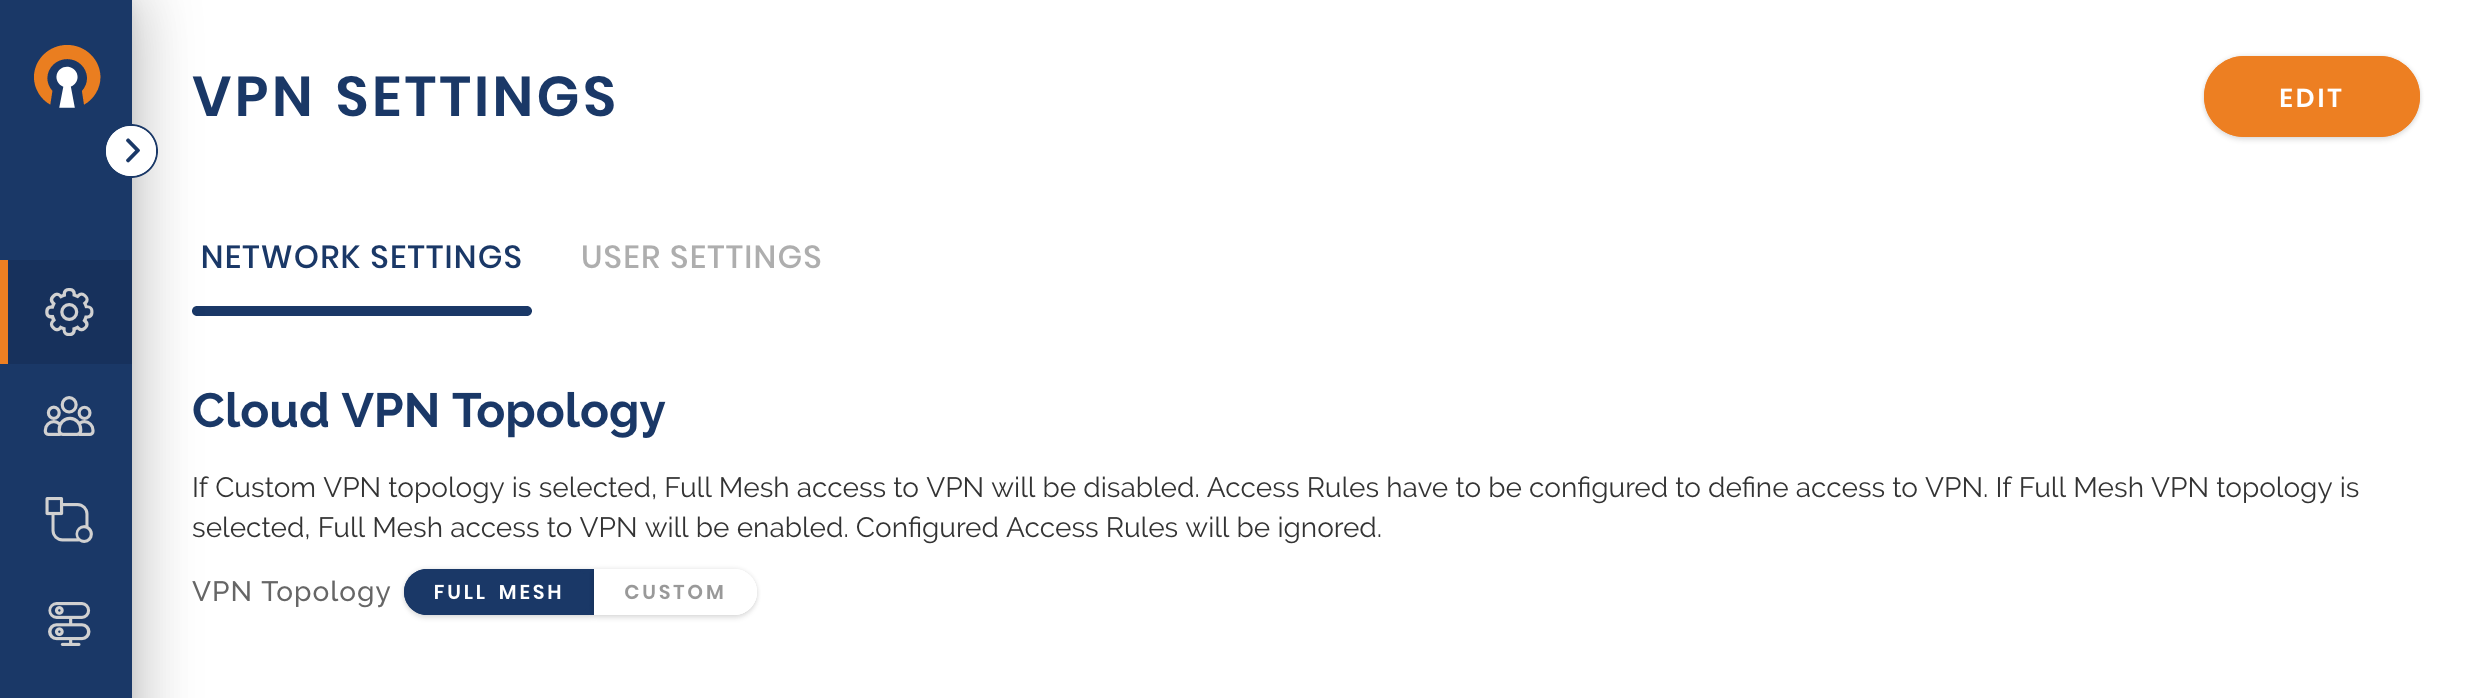 can i connect the osx vpn and another vpn on a mac